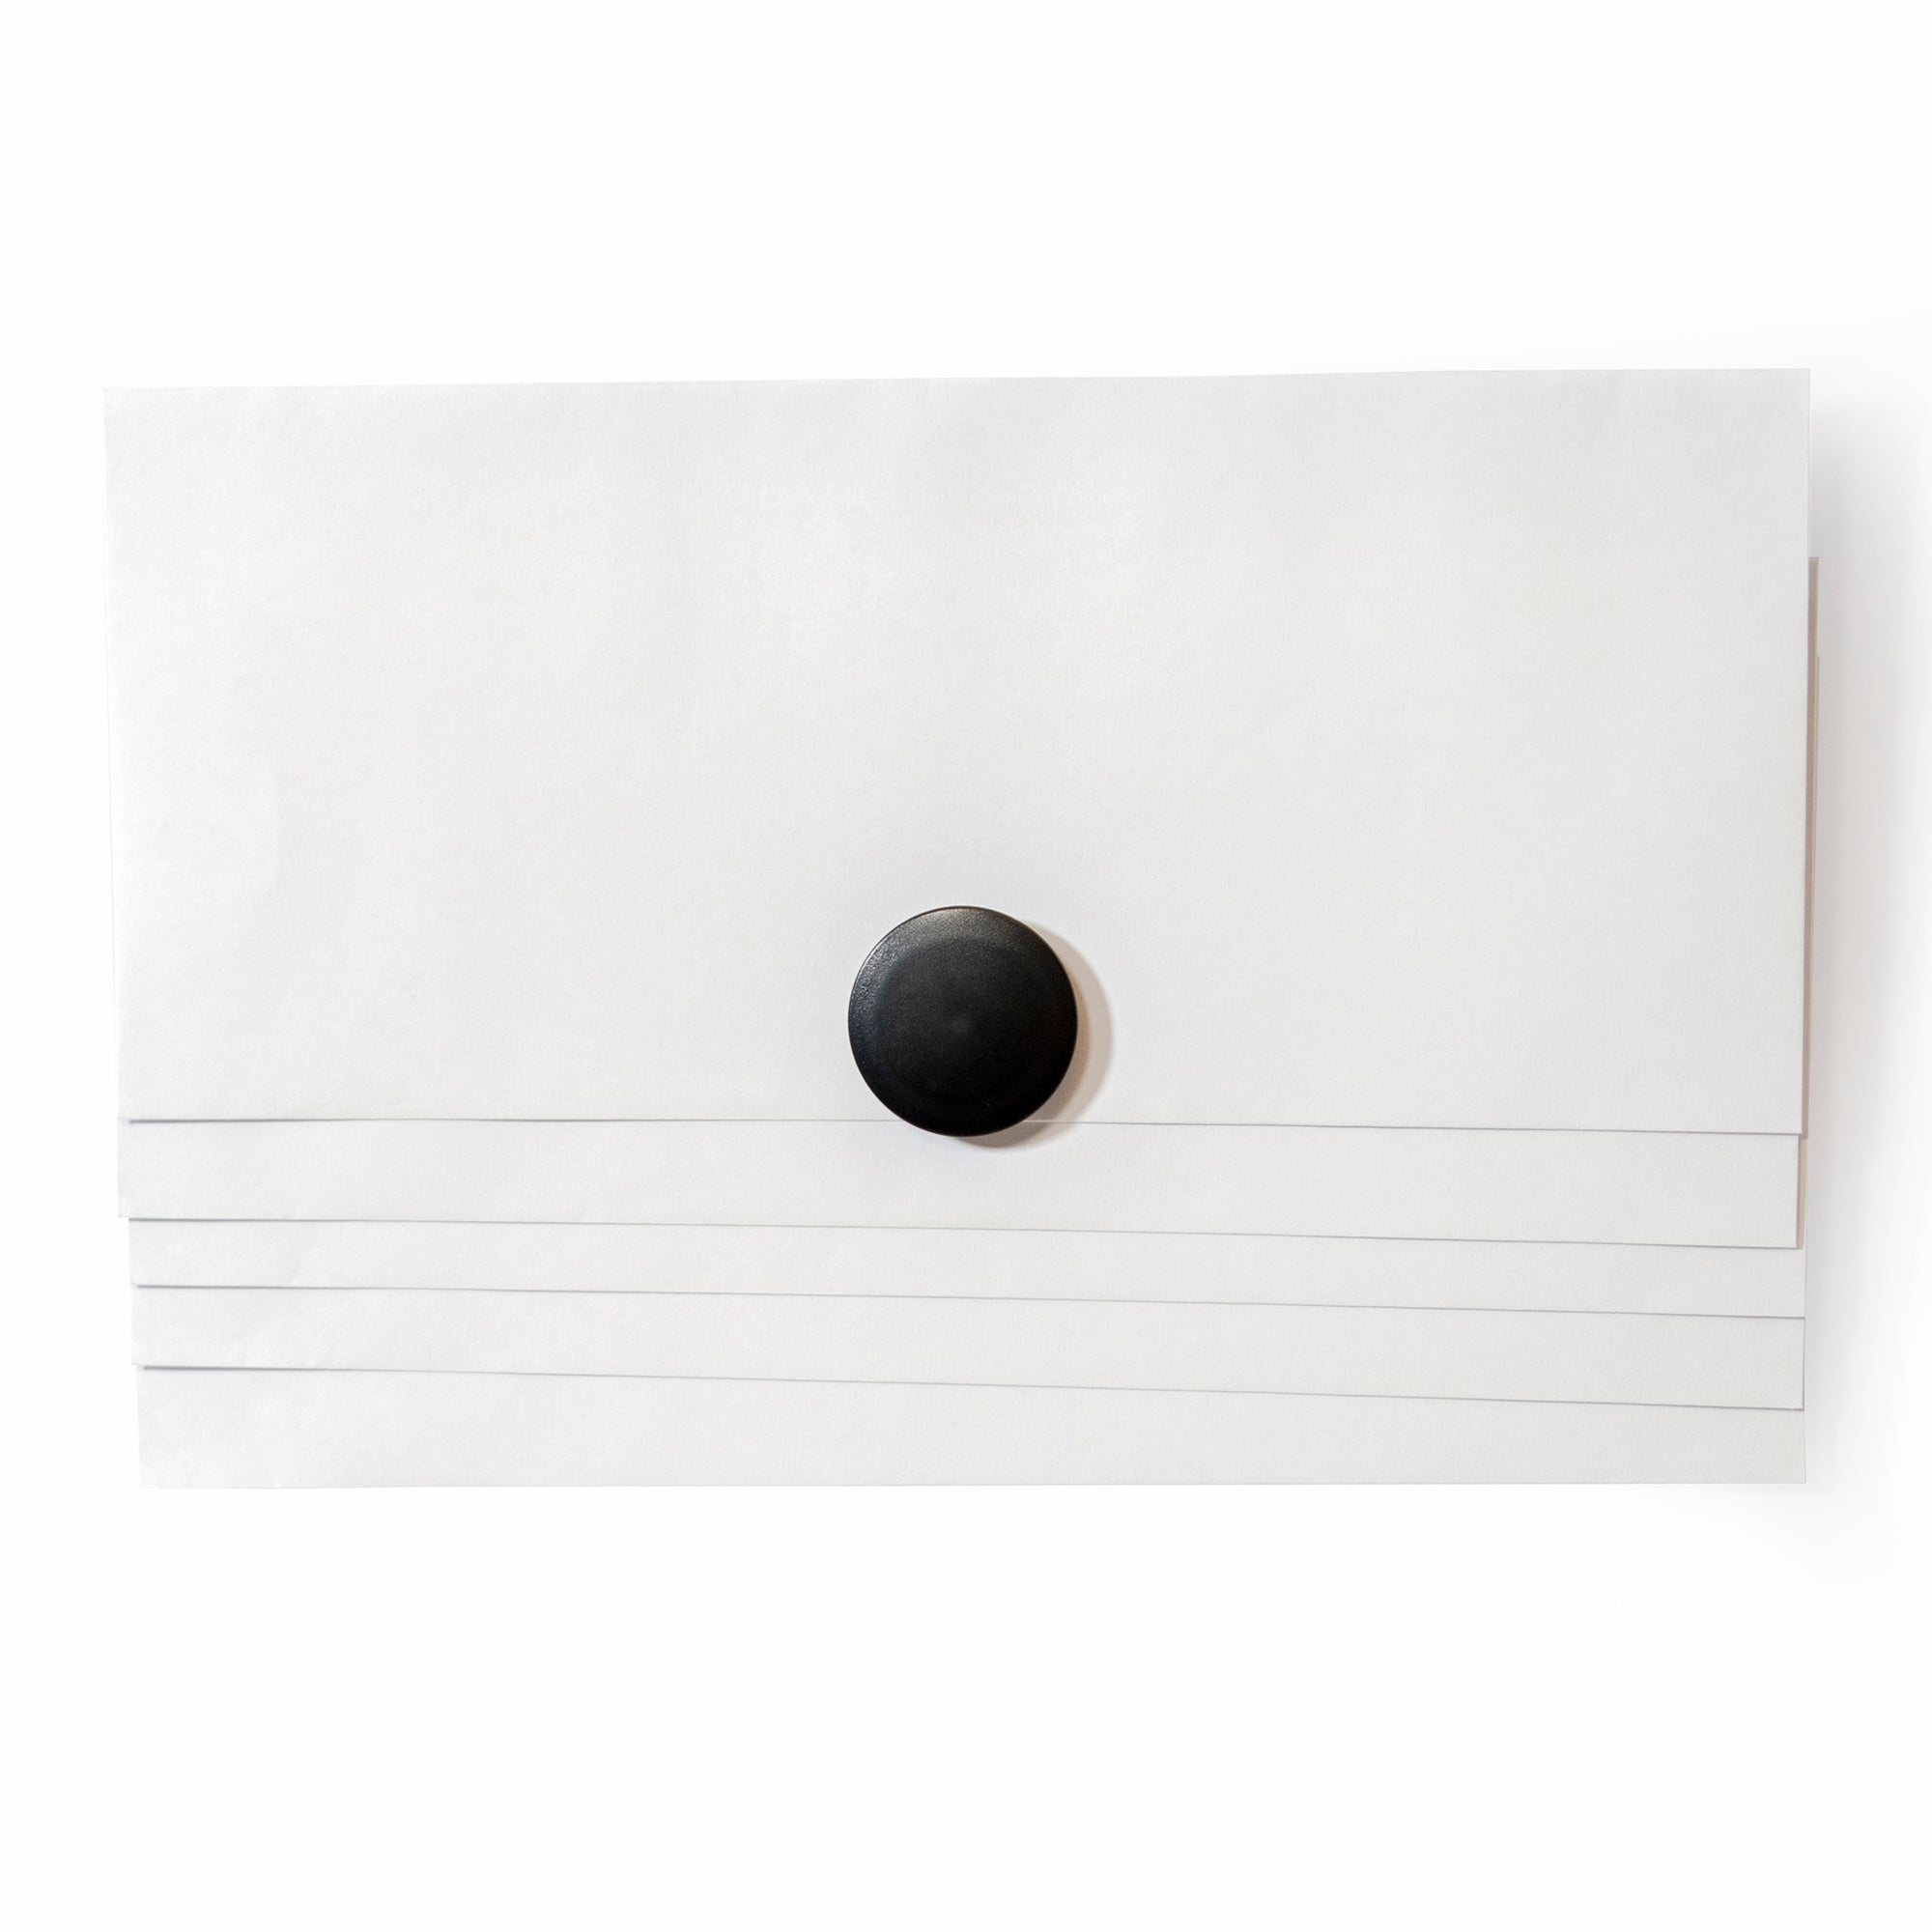 High Powered Magnets for Glass Dry-Erase Boards, Set of 5 Black. 